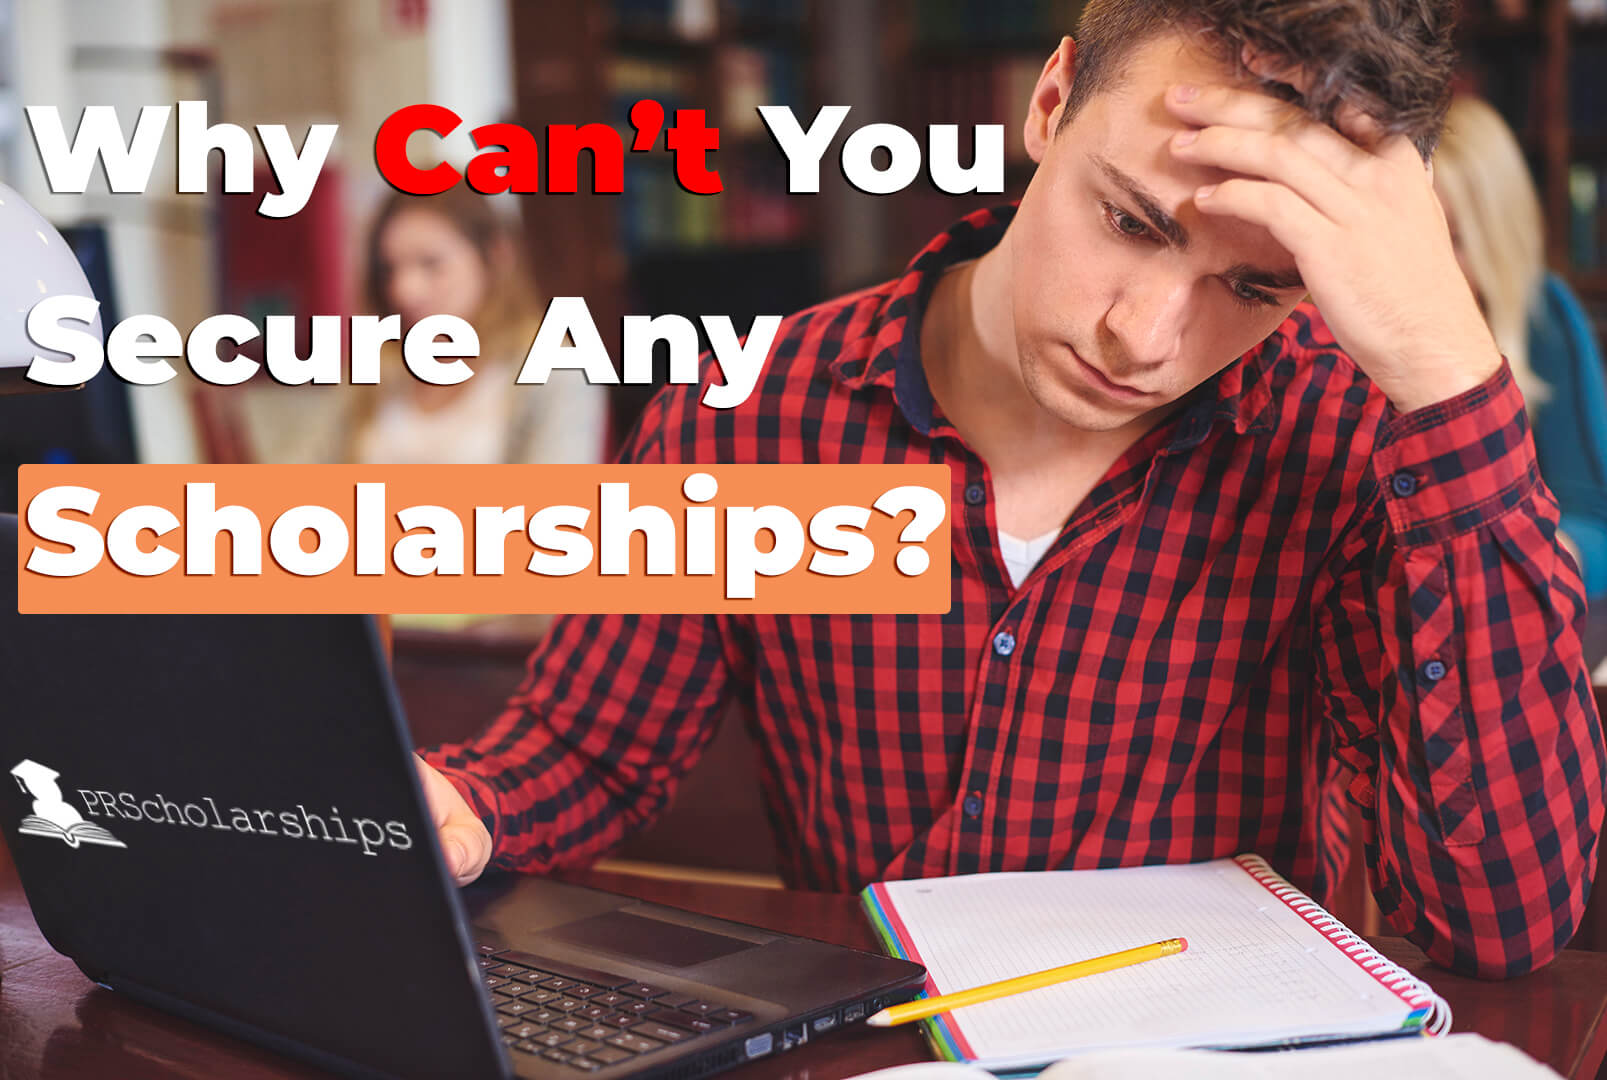 A student stressing about failing to secure scholarships